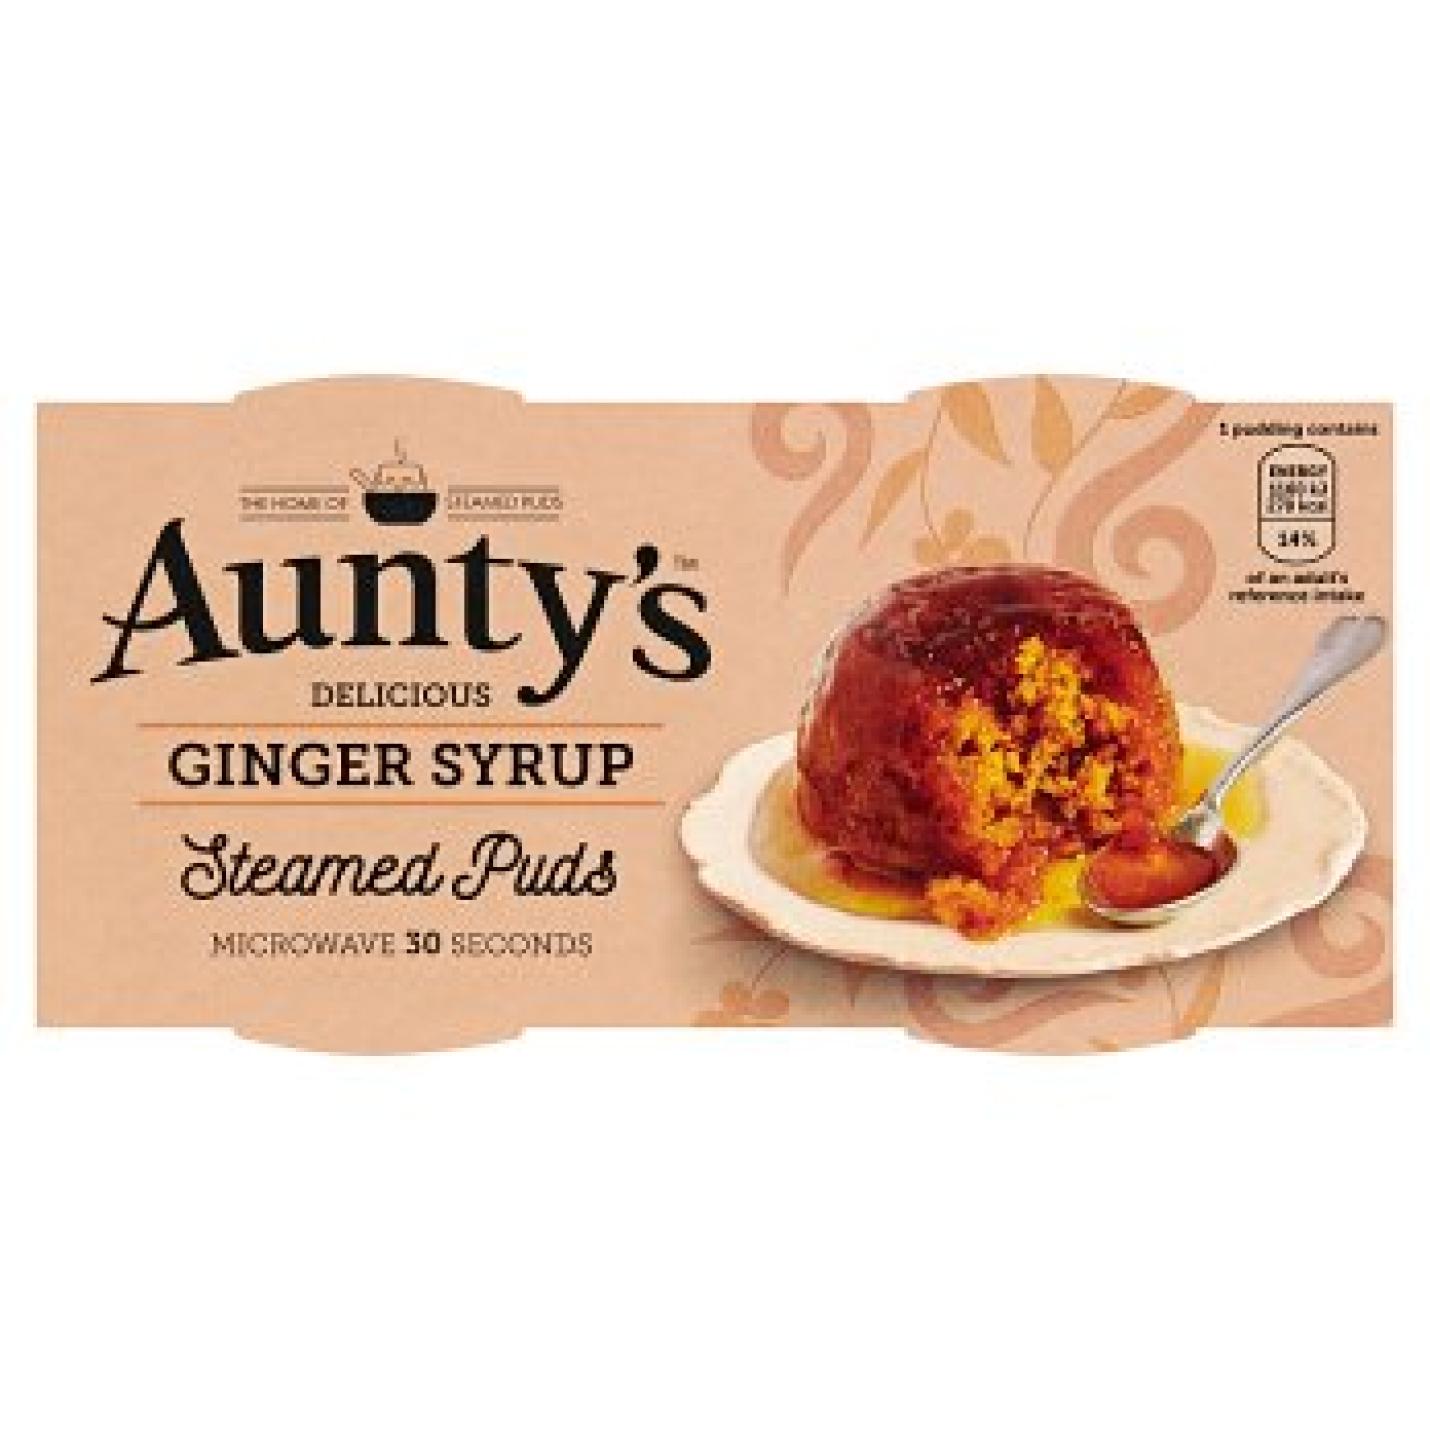 Aunty's Ginger Syrup Steamed Puds 2x95g